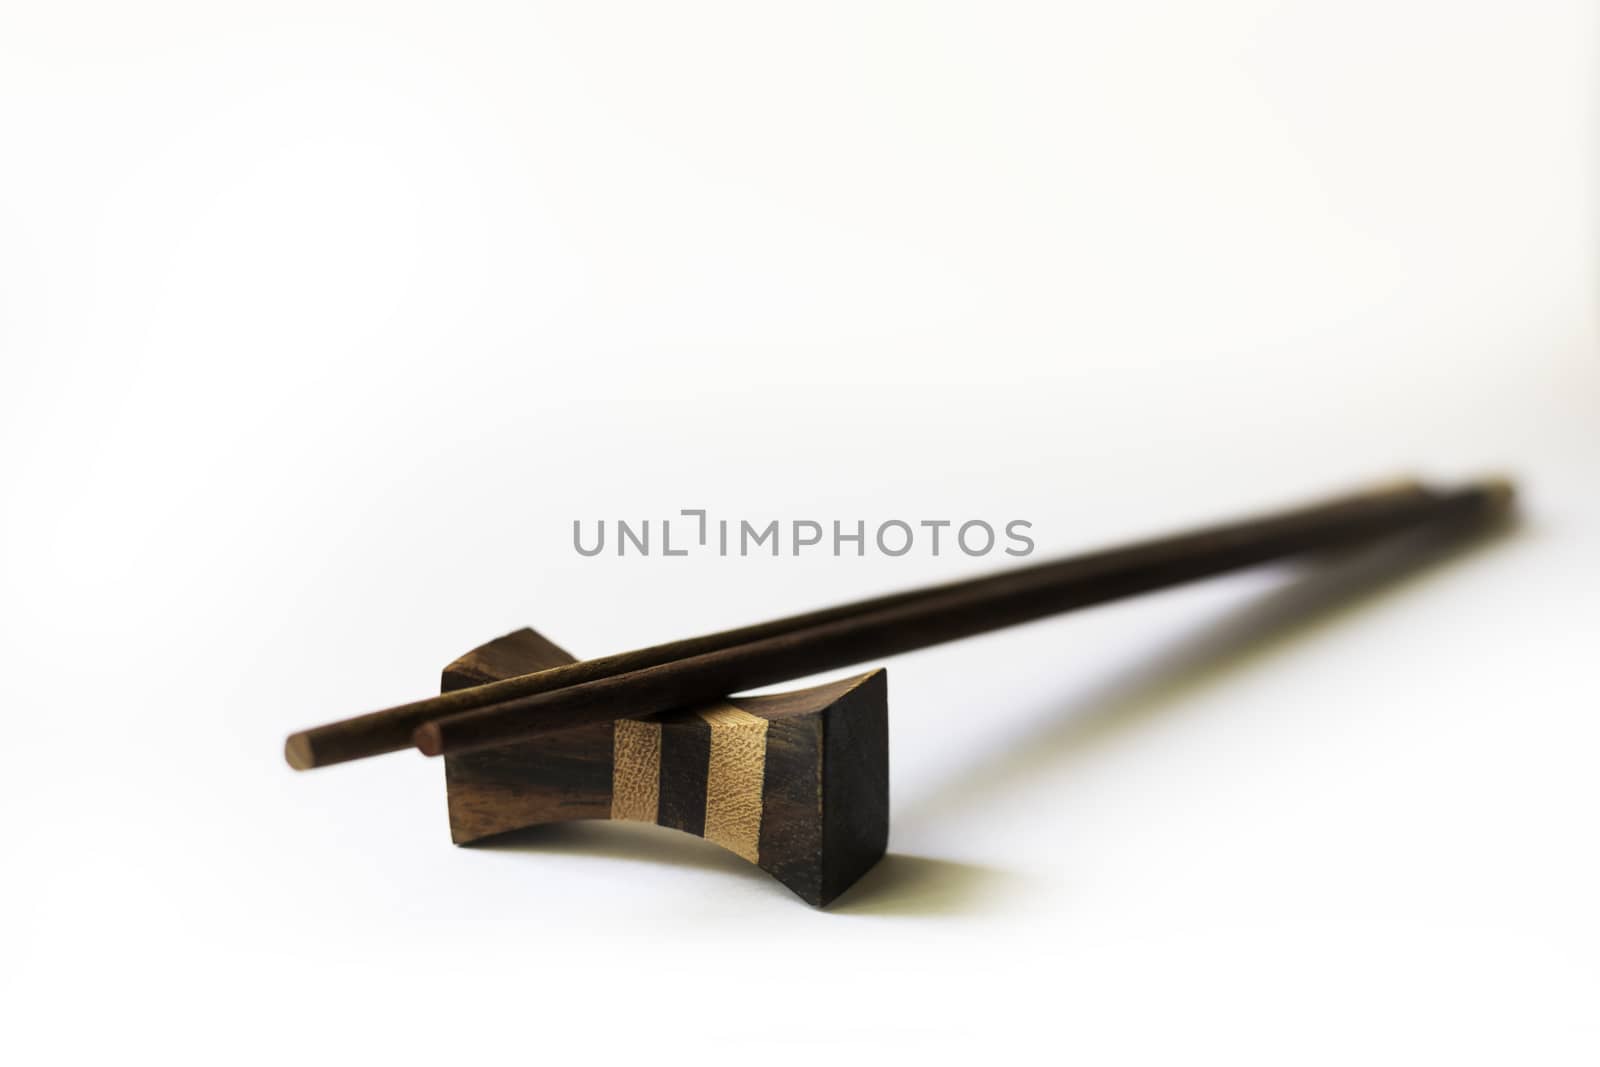 set of chinese chopsticks on a white background by enrico.lapponi